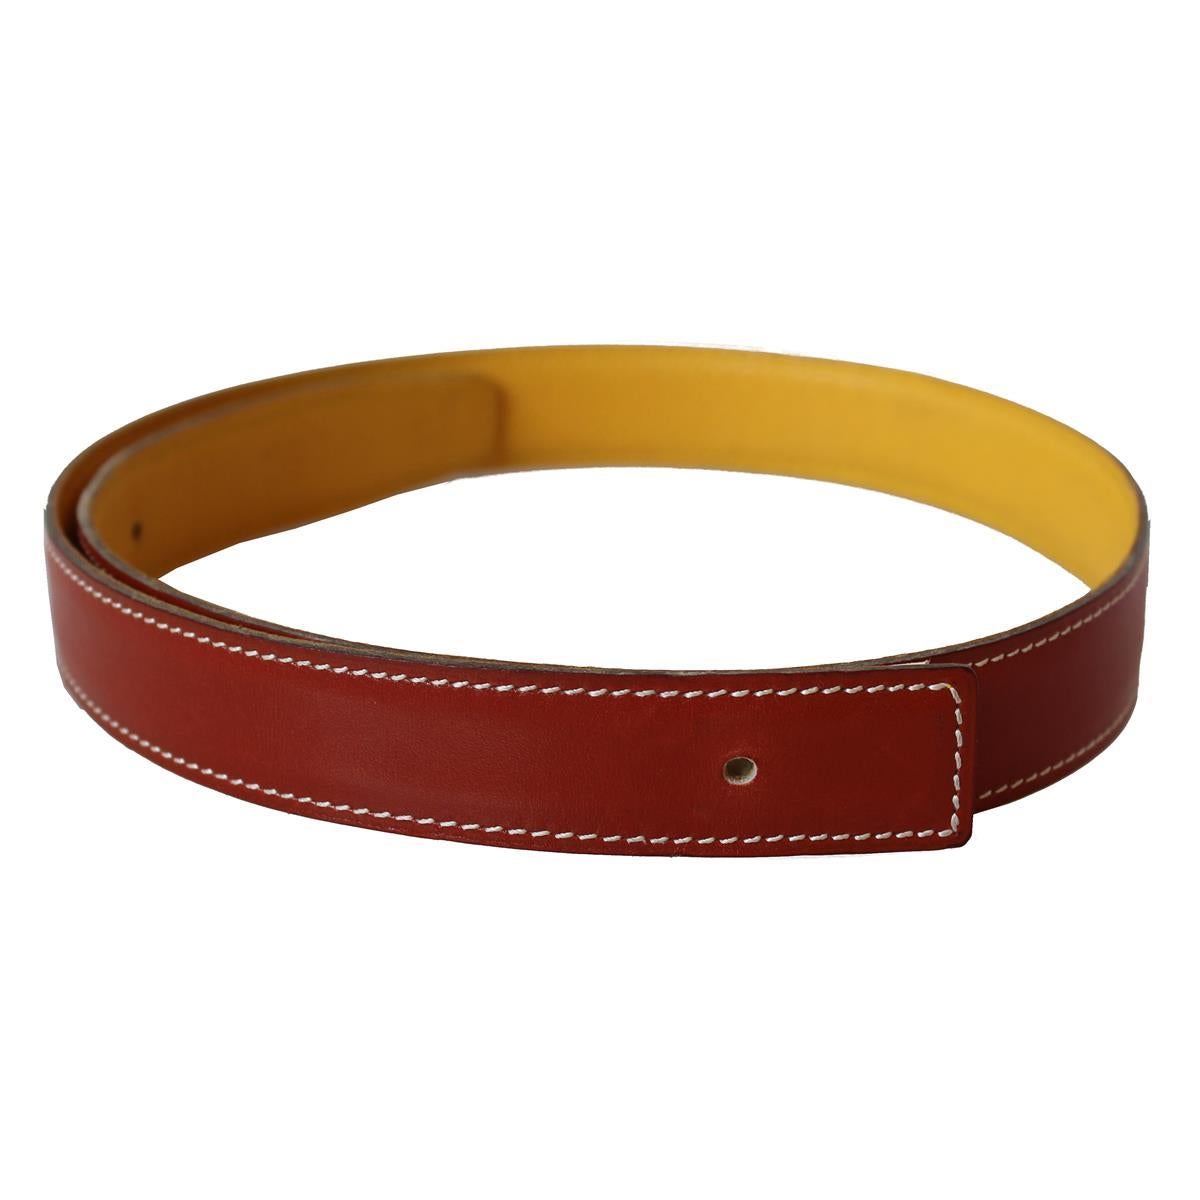 Iconic reversible belt strap (without buckle)
Leather
Ochre color on first side, clay on other
2,5 cm height (0.59 inches)
Size 65
Total length cm 80 
Worldwide express shipping included in the price !